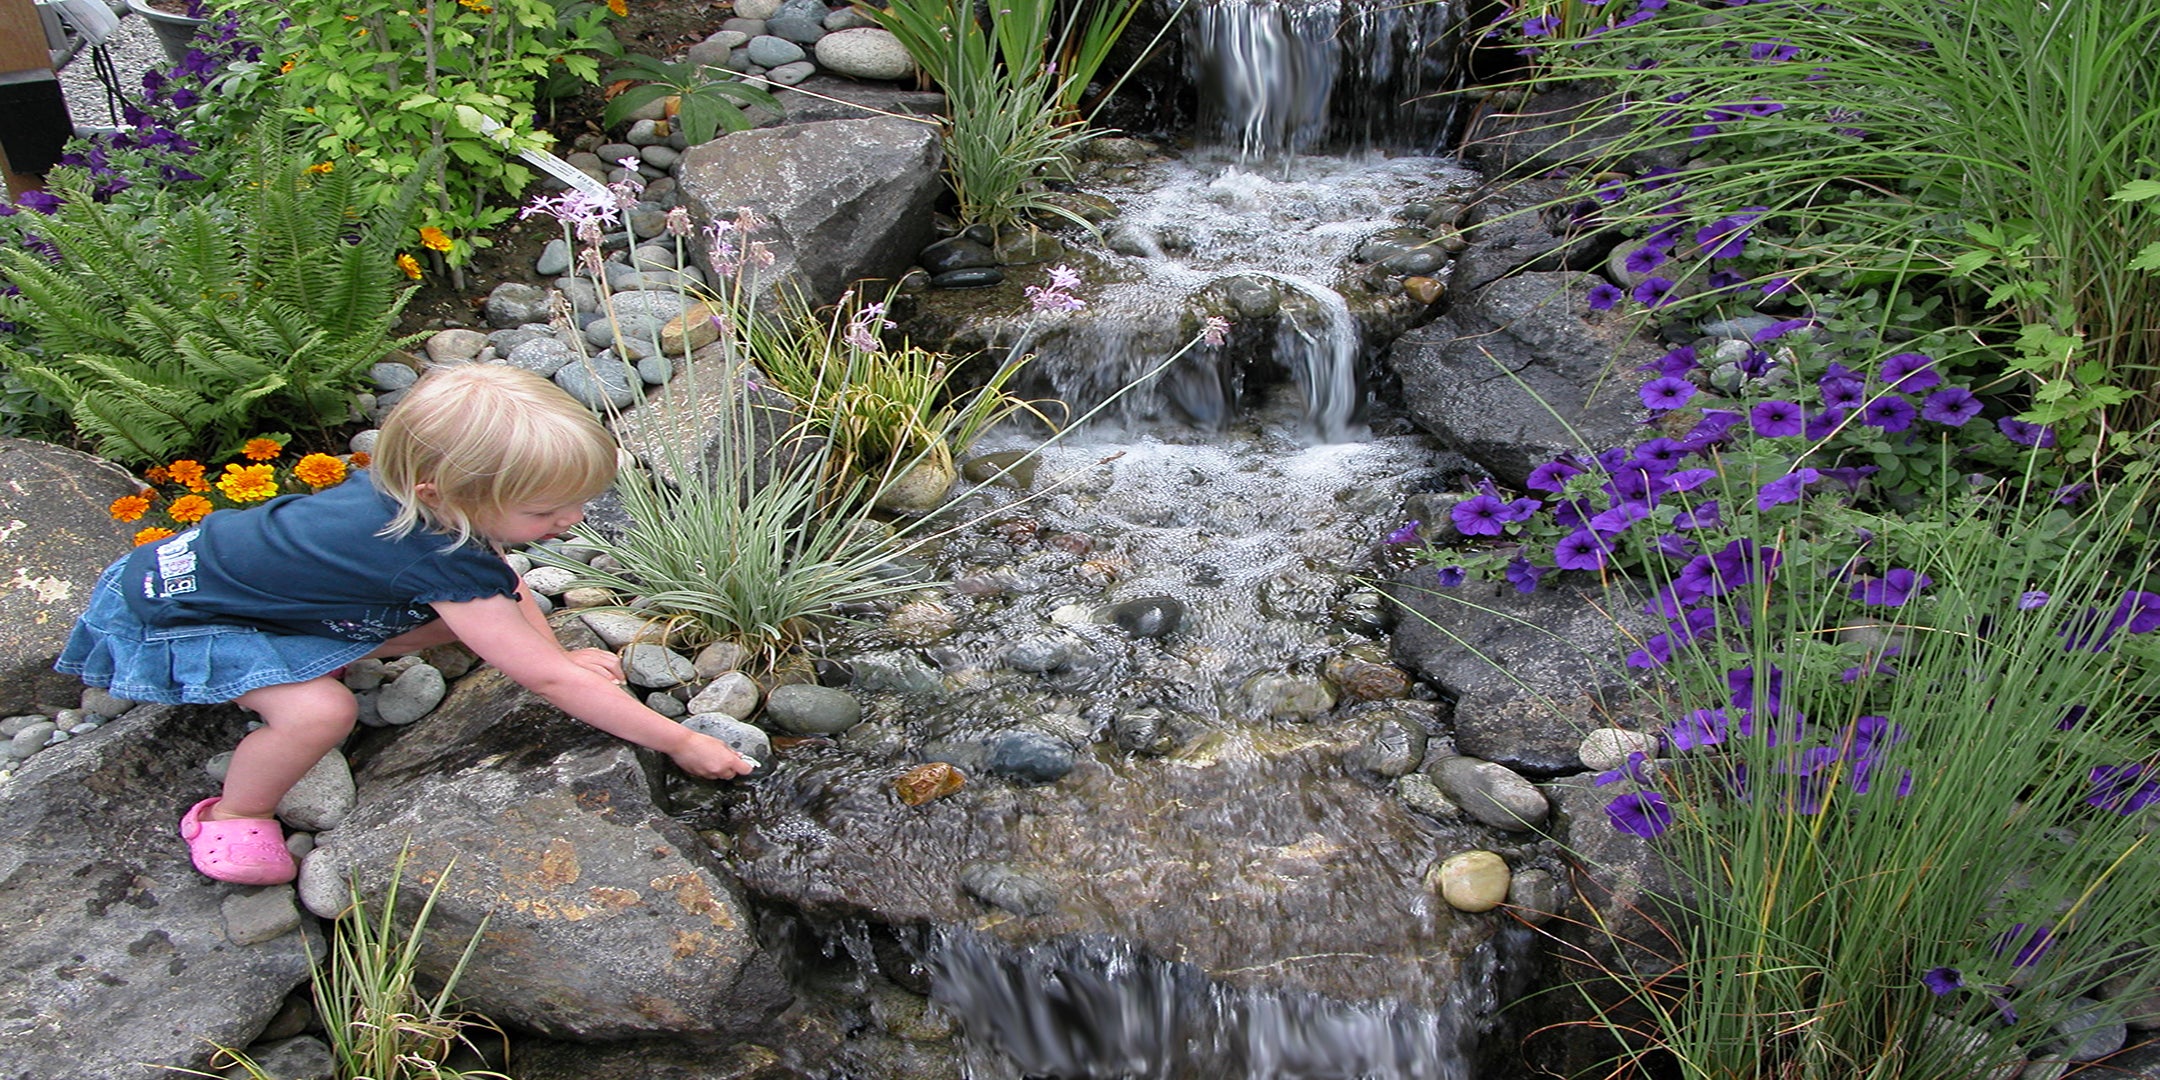 Three step waterfalls with a child placing stones in the water